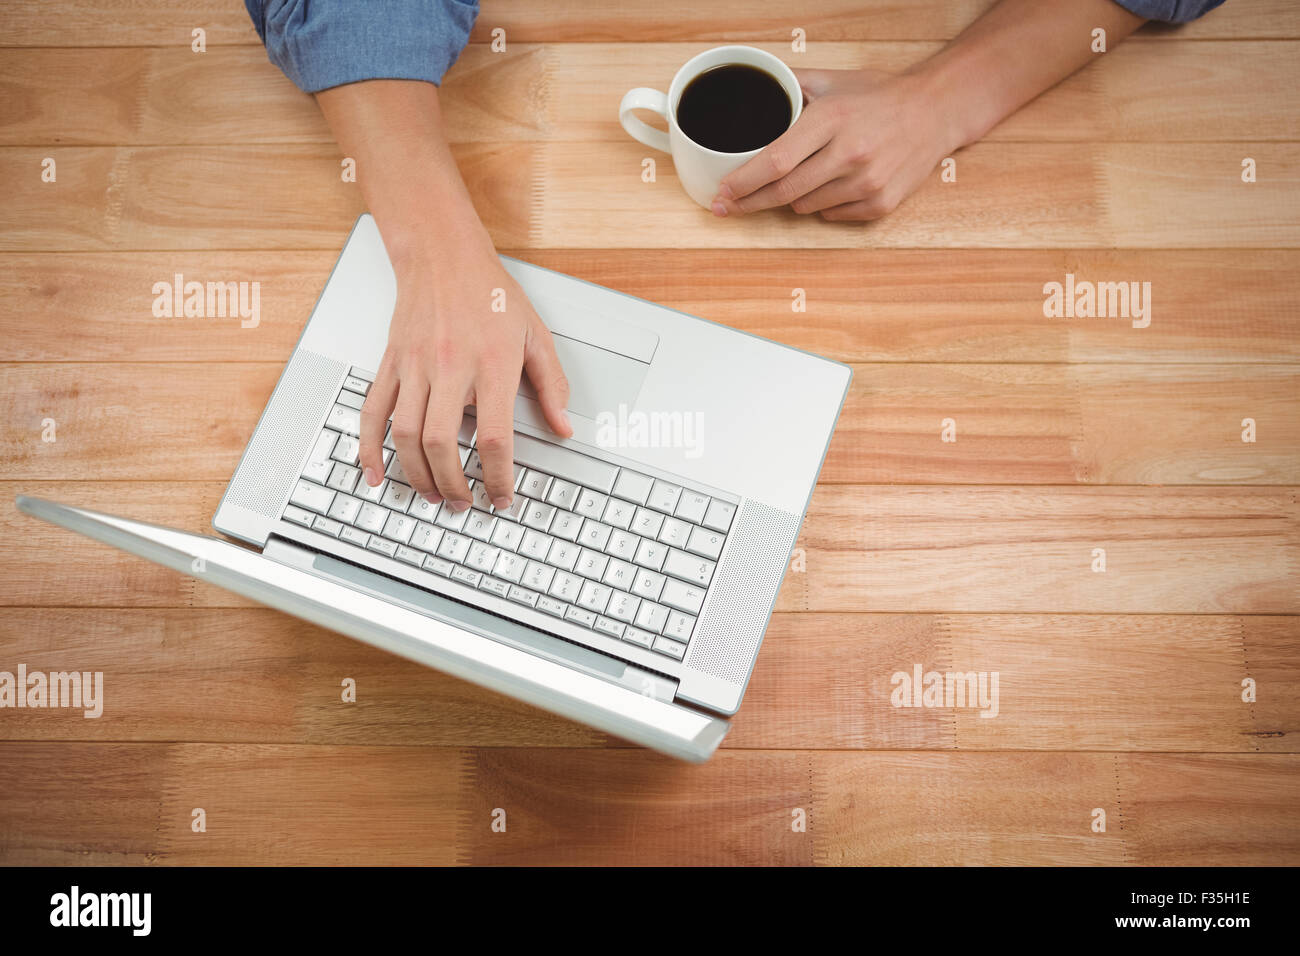 Man holding coffee while working on laptop Stock Photo